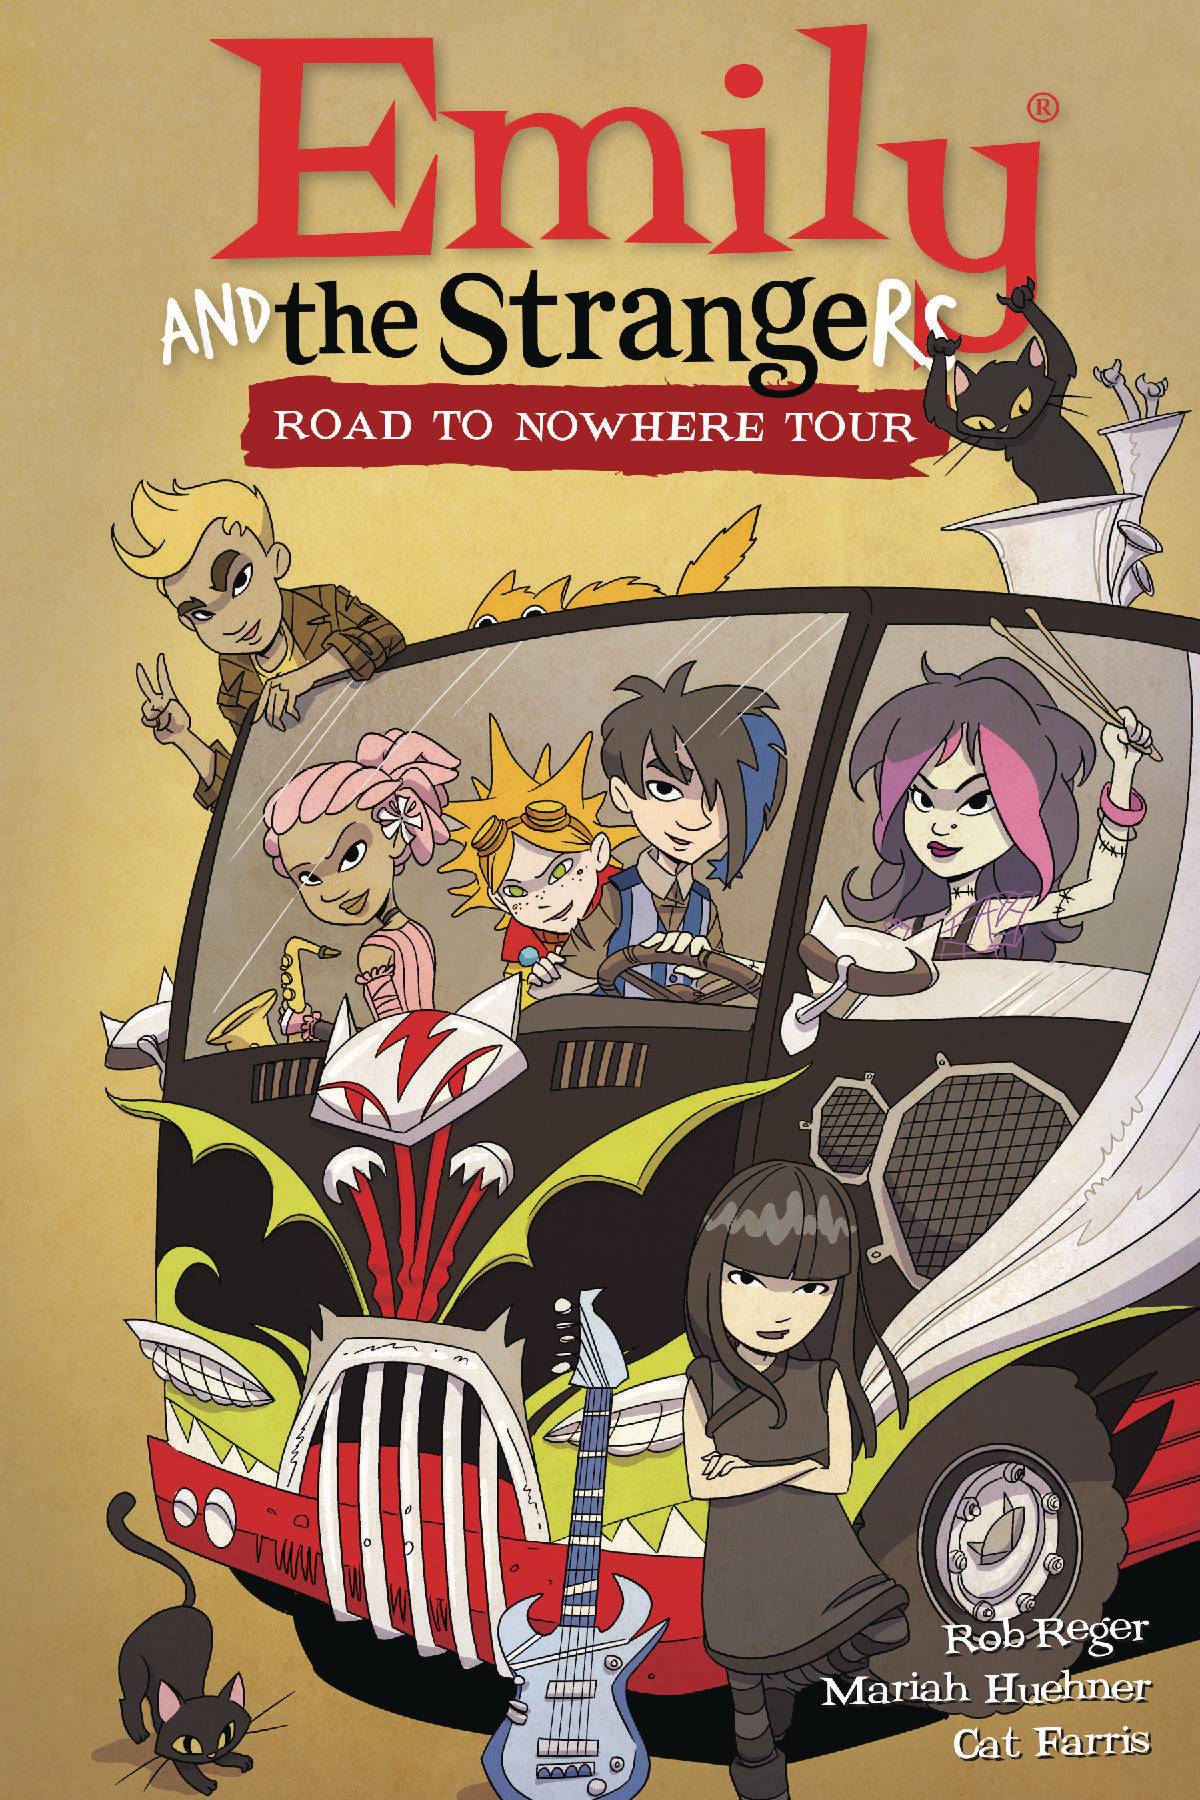 Emily And The Strangers Vol. 03 Road to Nowhere Tour